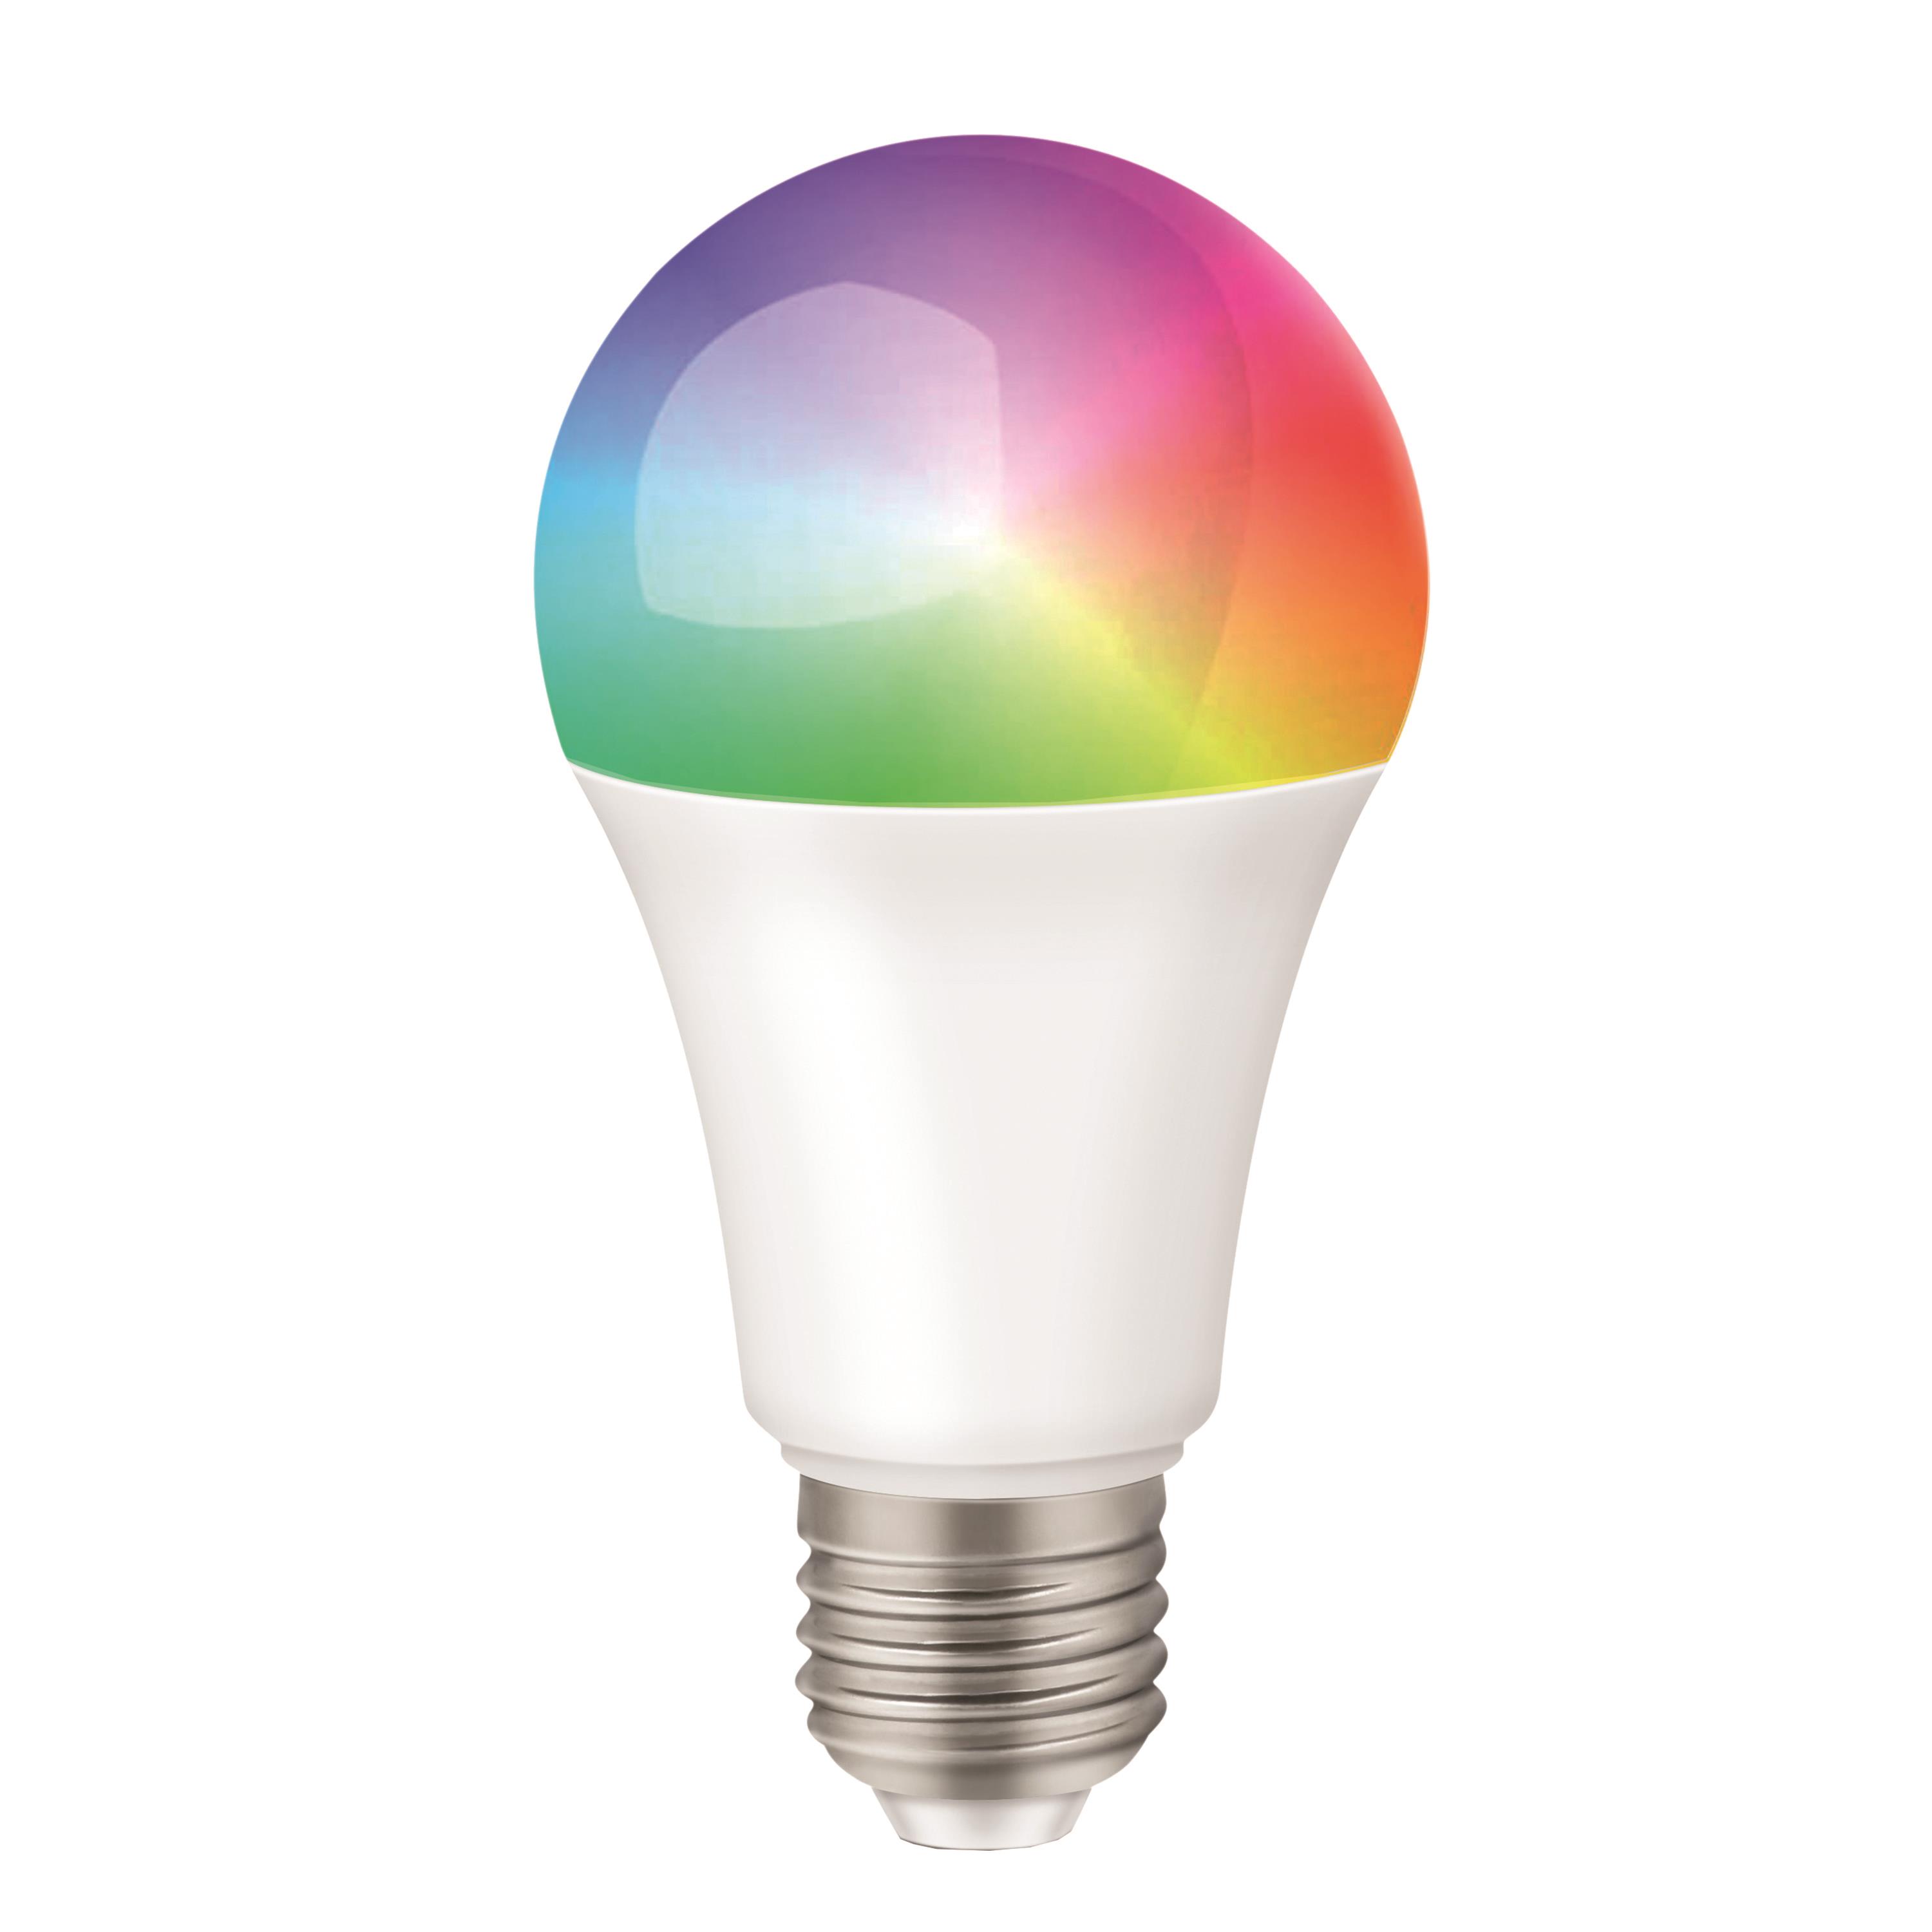 Wifi LED Smart Bulb with Voice Assist